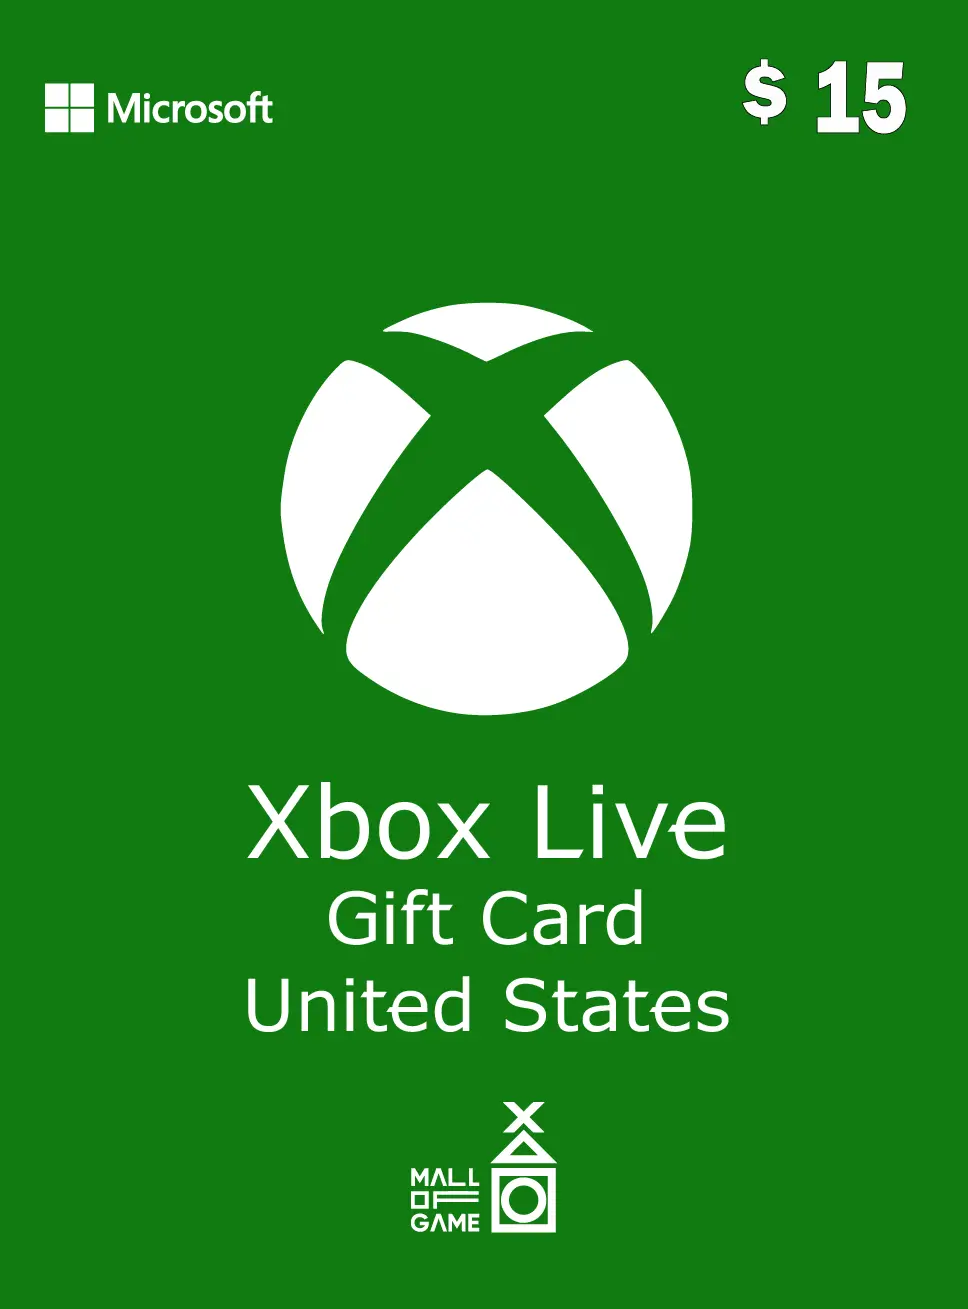 Xbox Live Gift Card - US$ 15